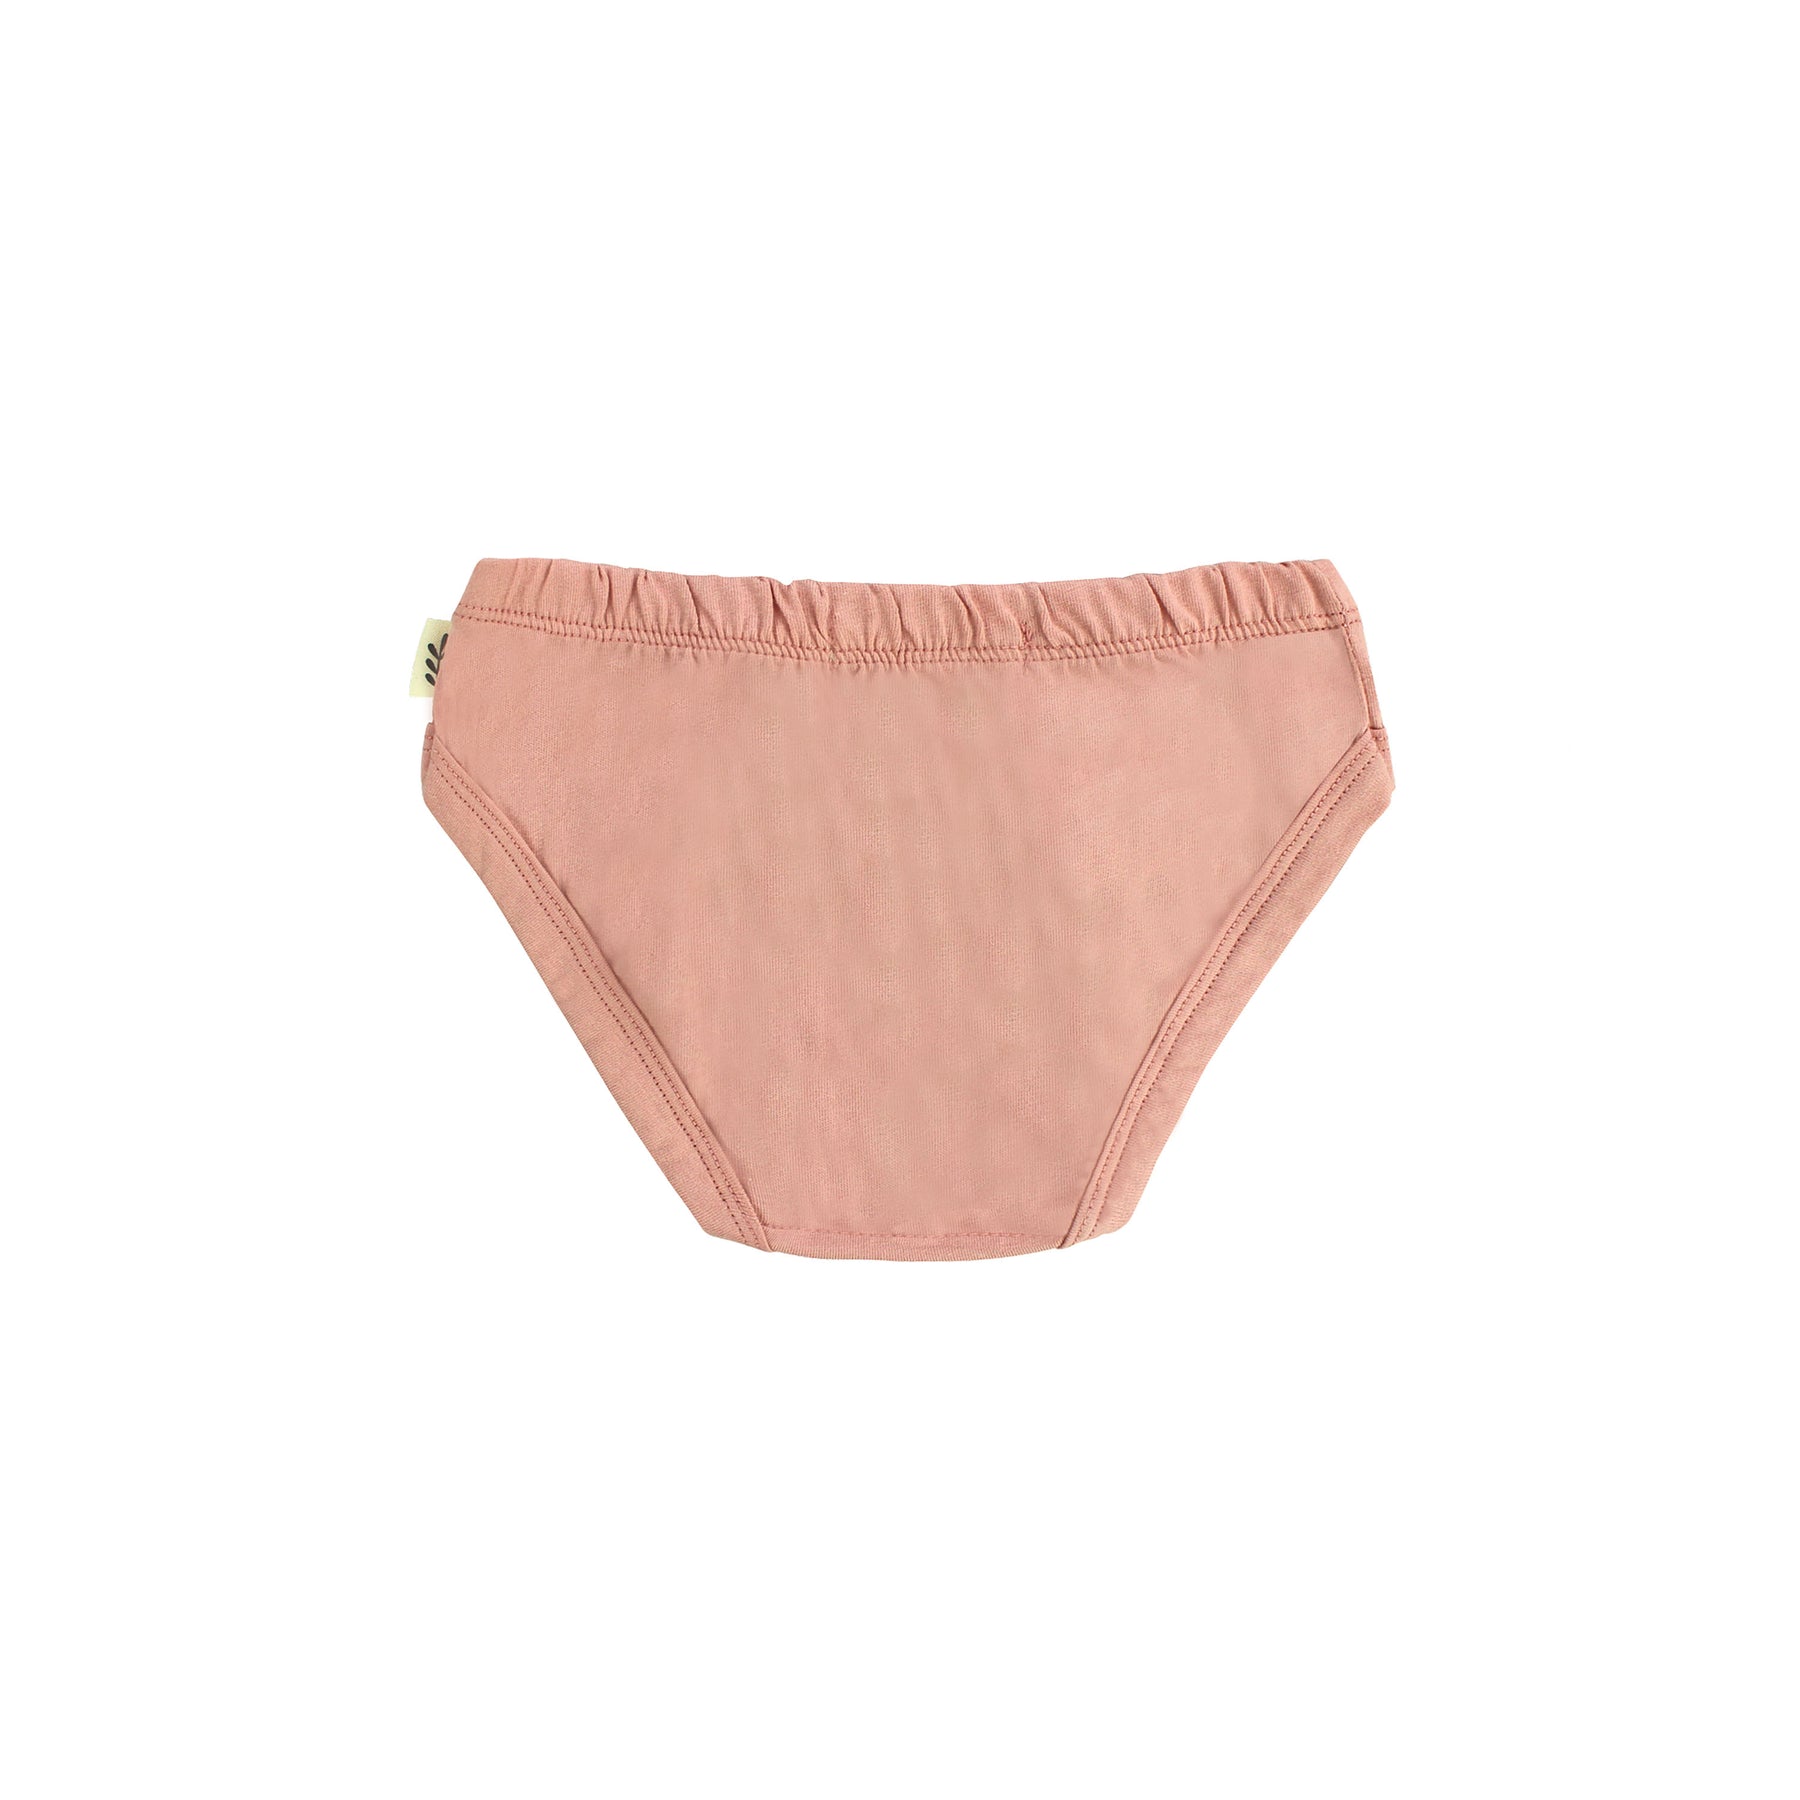 JADE Modest Organic Linen Panties, Natural Lacy Ladys Knickers